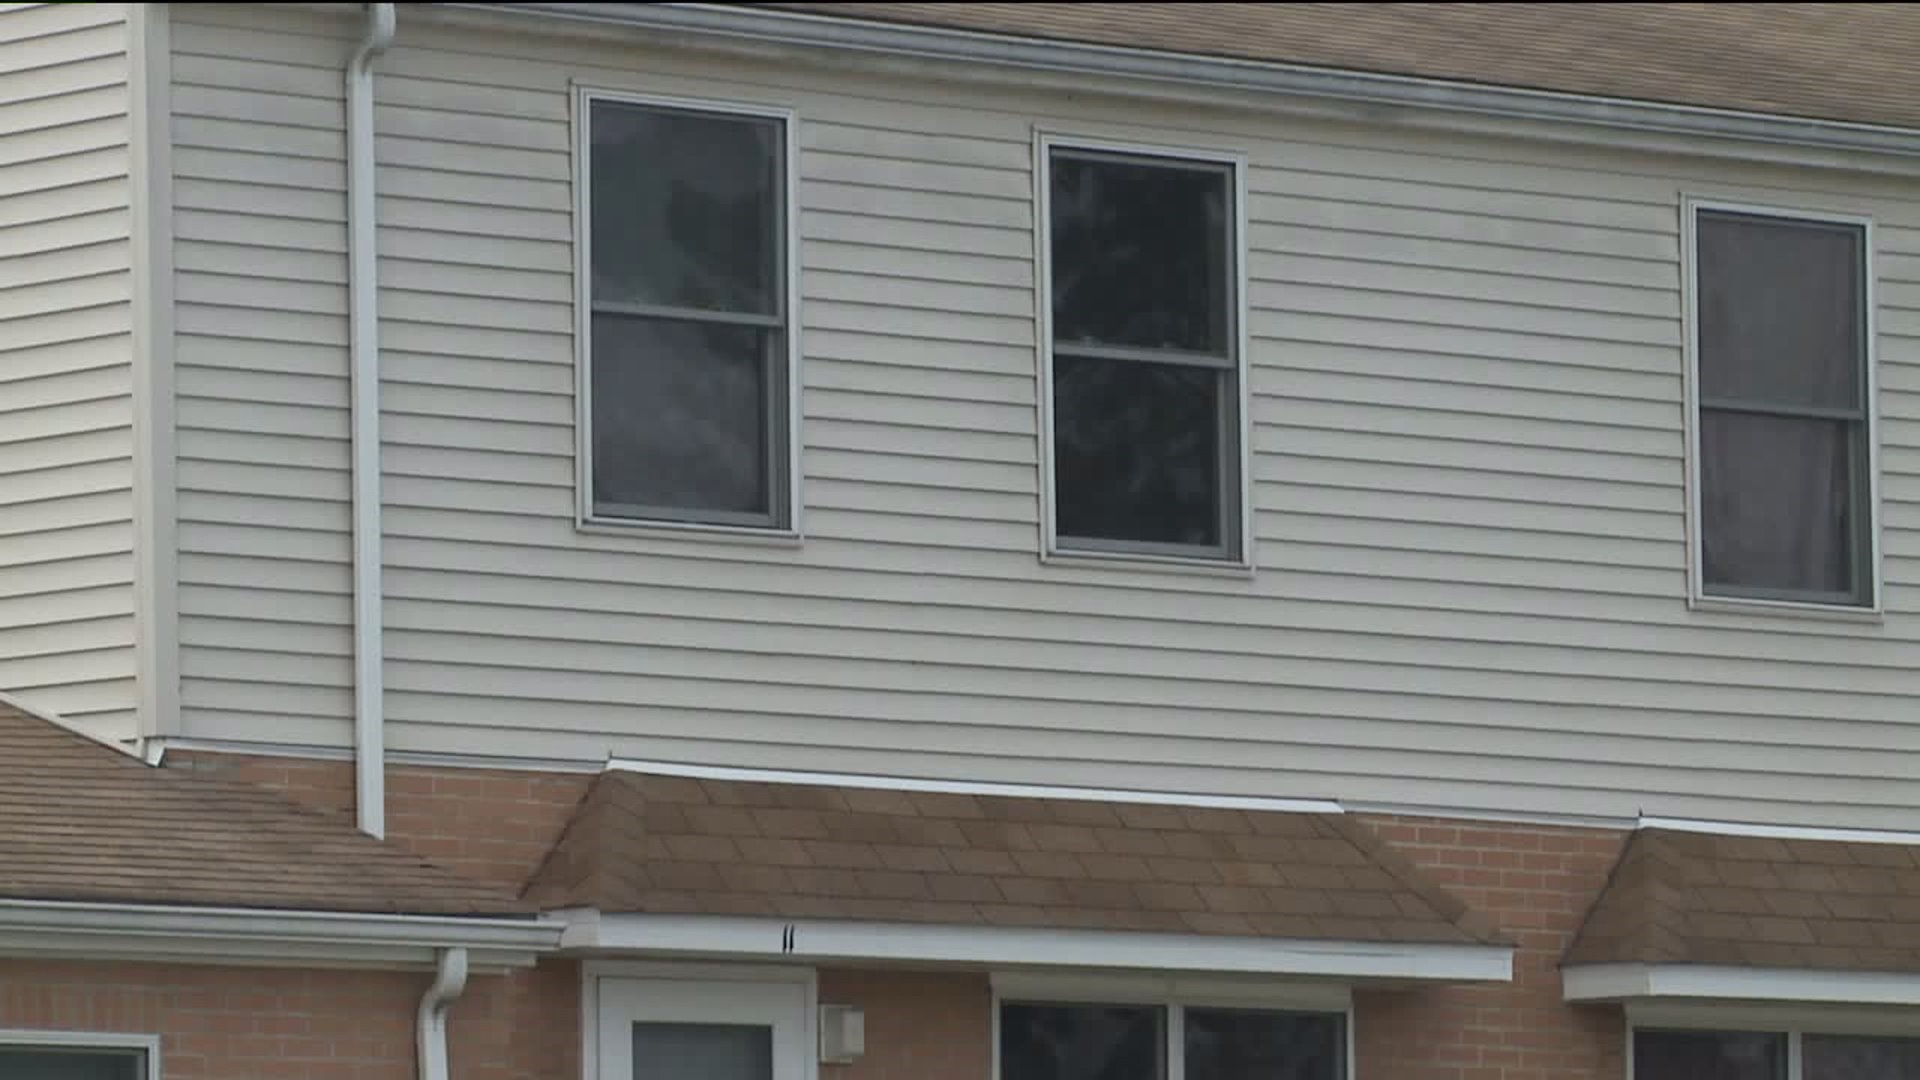 Woman Suffers Burns After Kitchen Fire in Plymouth